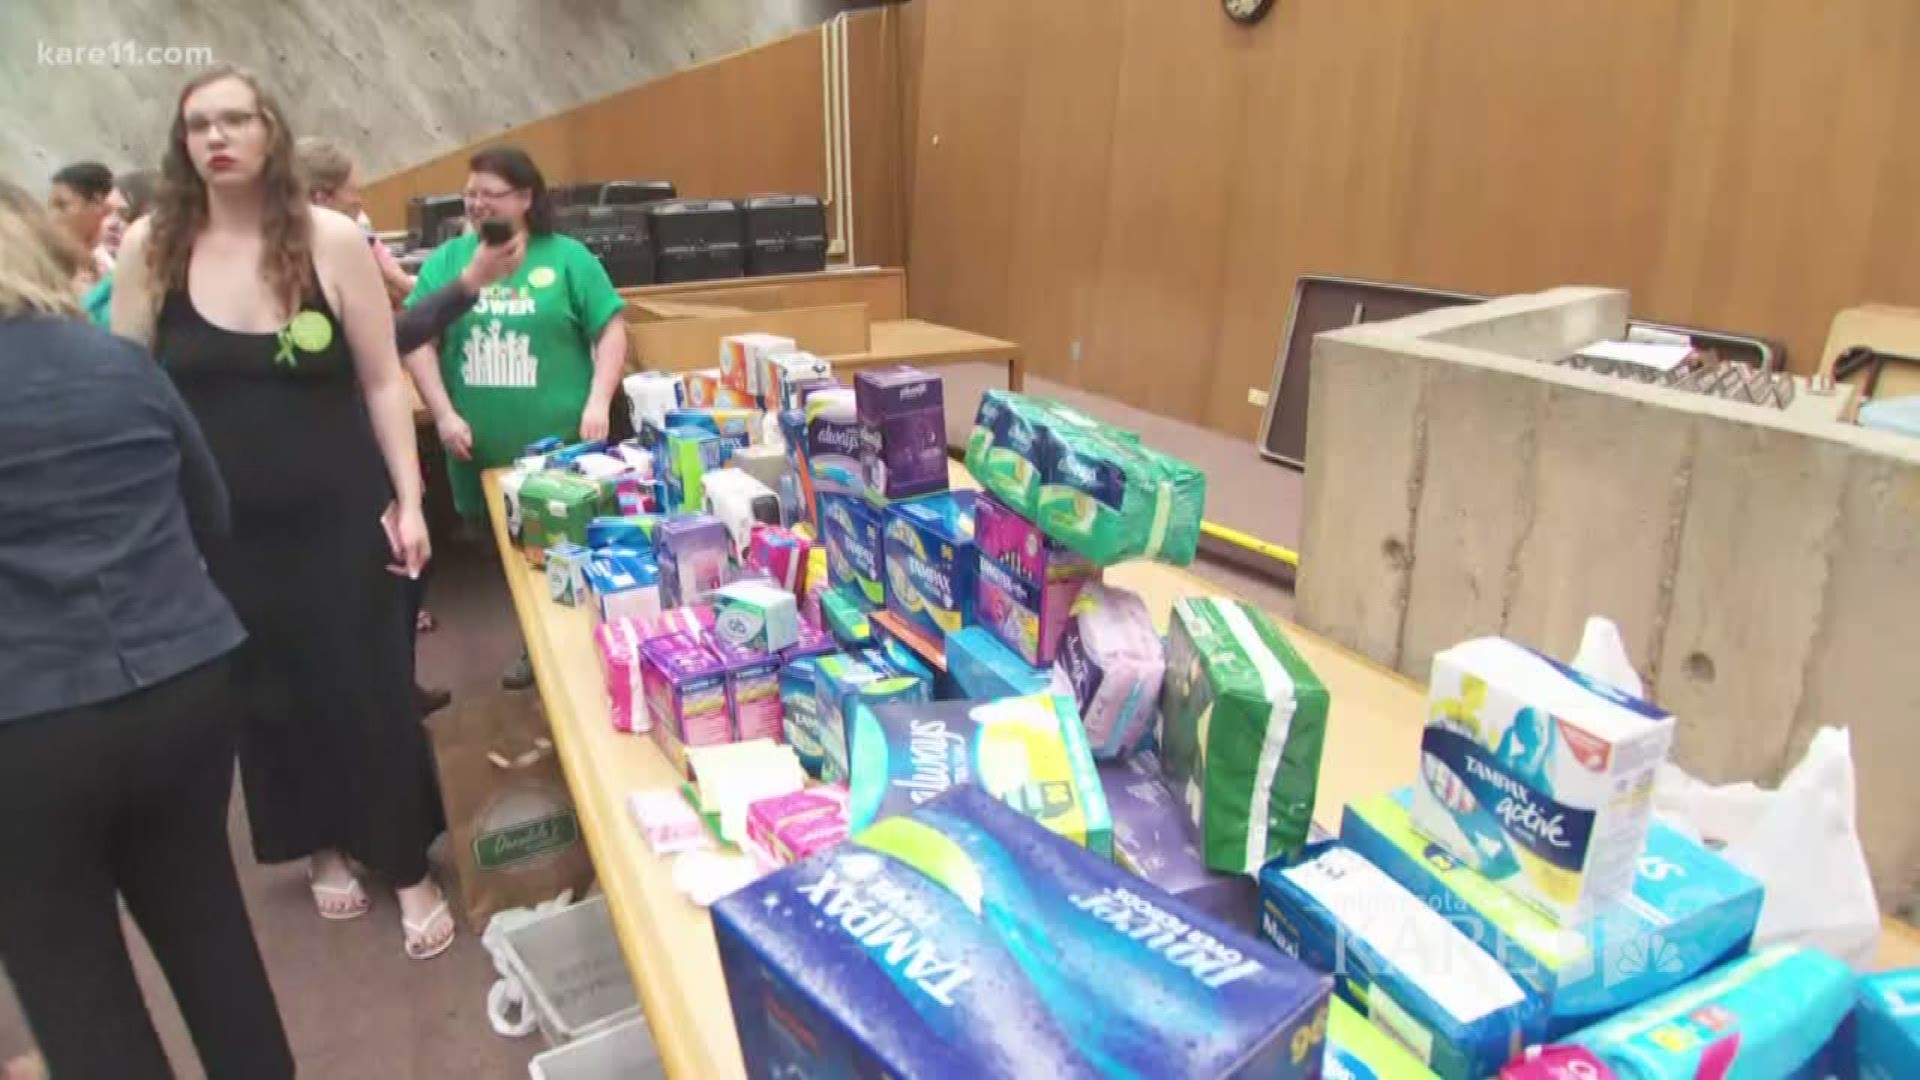 Women shared their frustration with the West St. Paul city council with a creative display of feminine products. All tampons and pads will be donated to women in need.